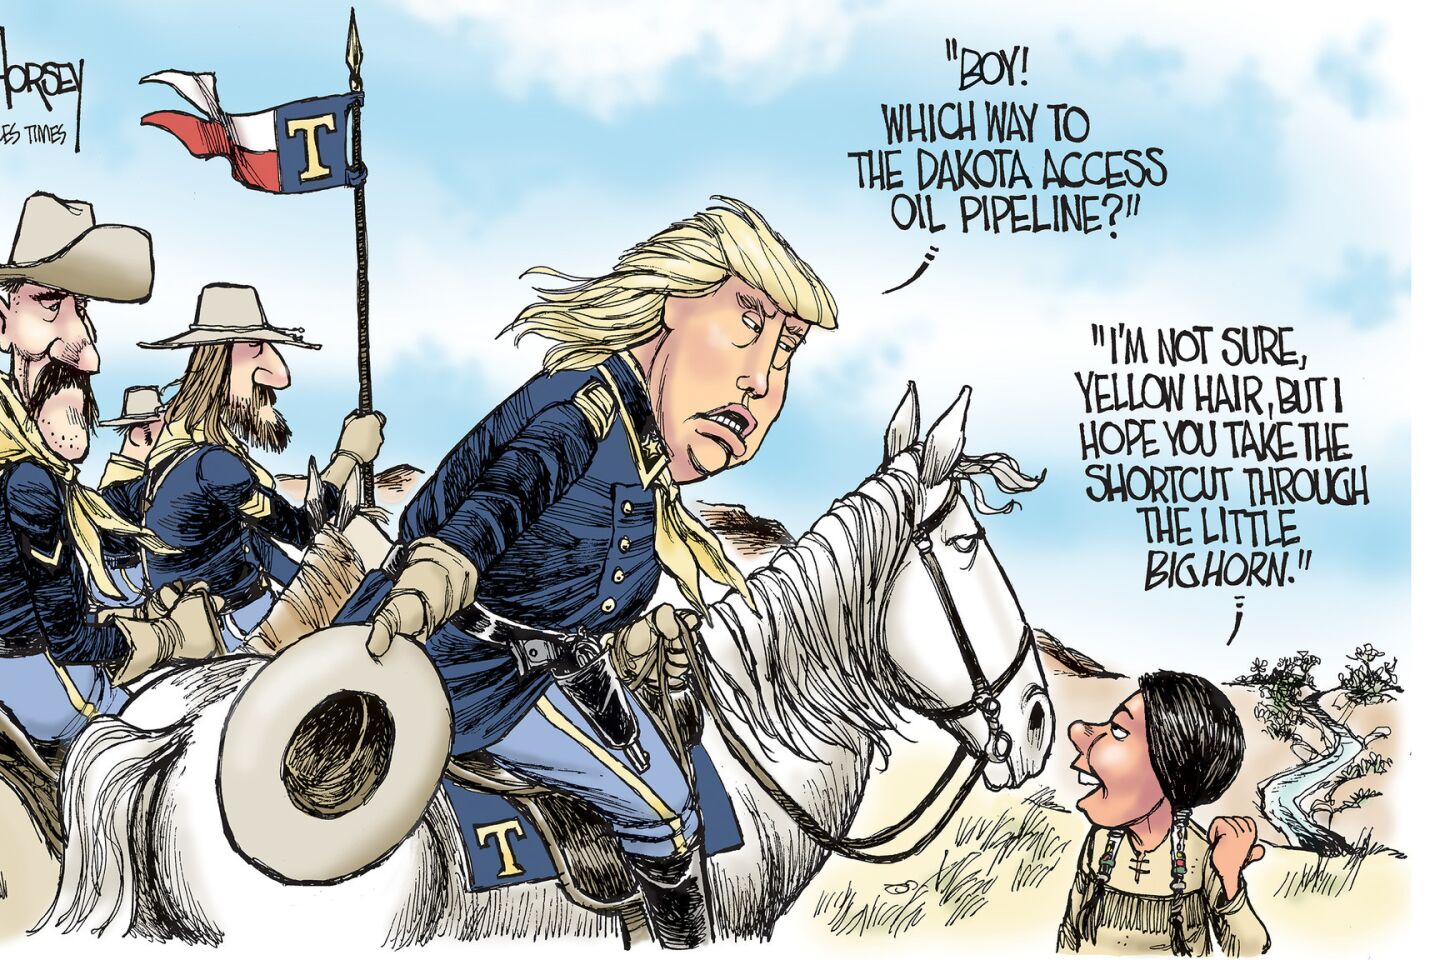 Donald Trump leads the cavalry charge at Standing Rock.